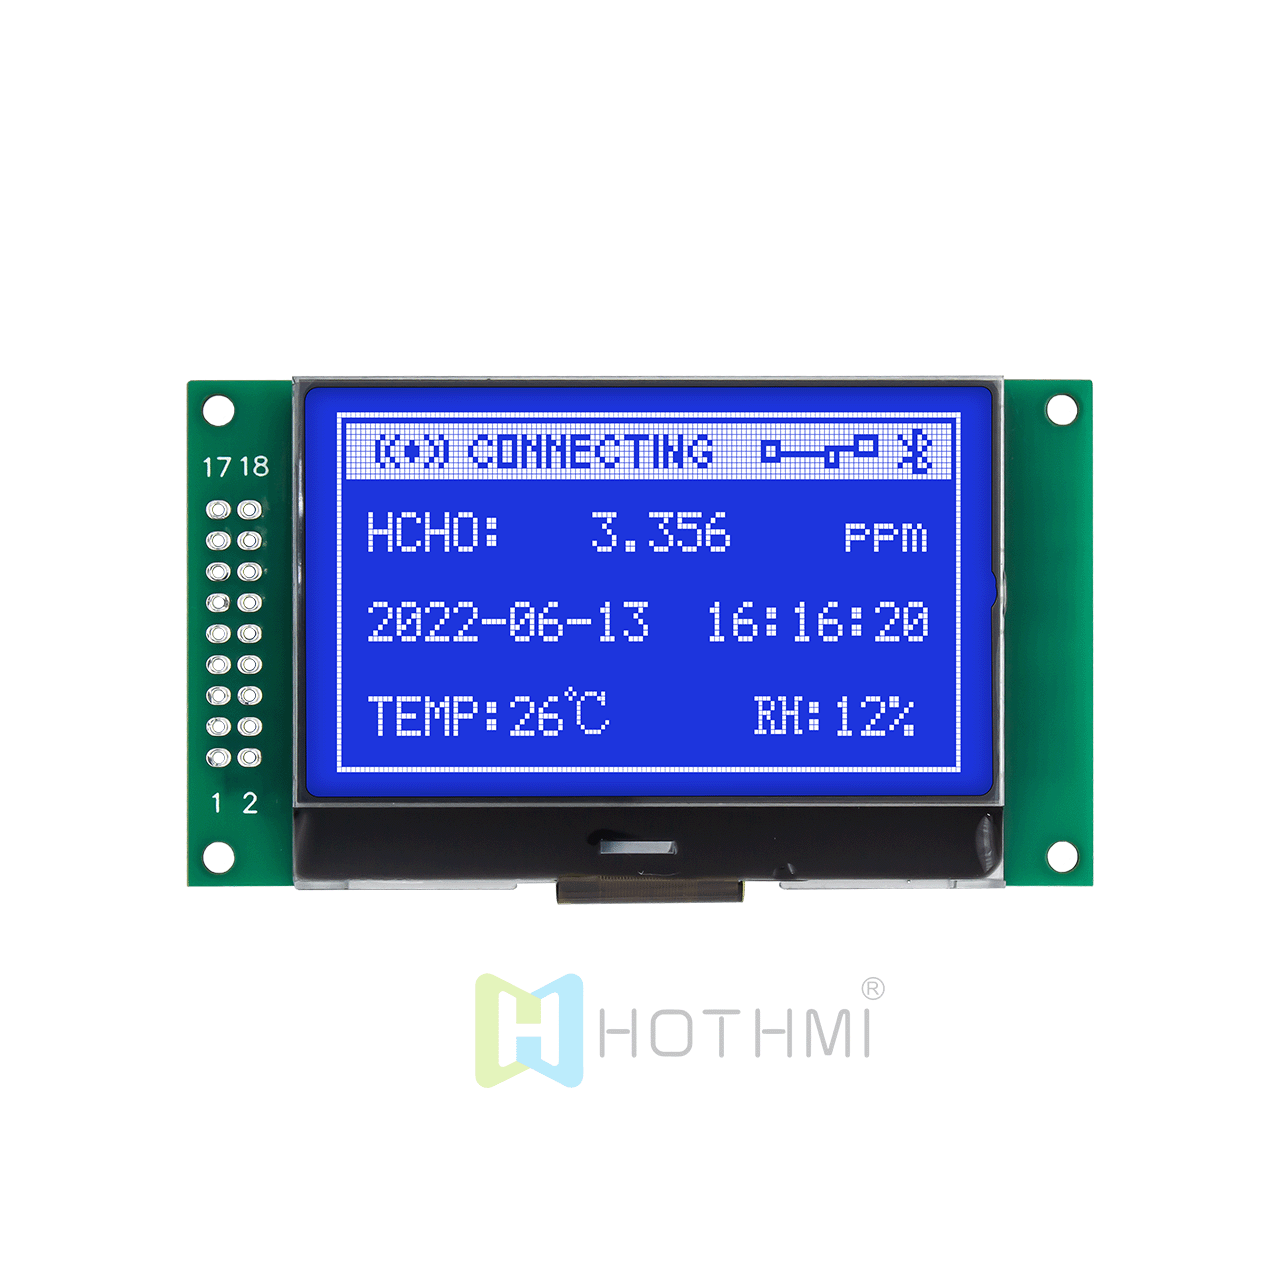 2.4-inch LCD132x64 graphic LCD screen/LCM13264 graphic dot matrix LCD module/STN negative display/blue background with white characters